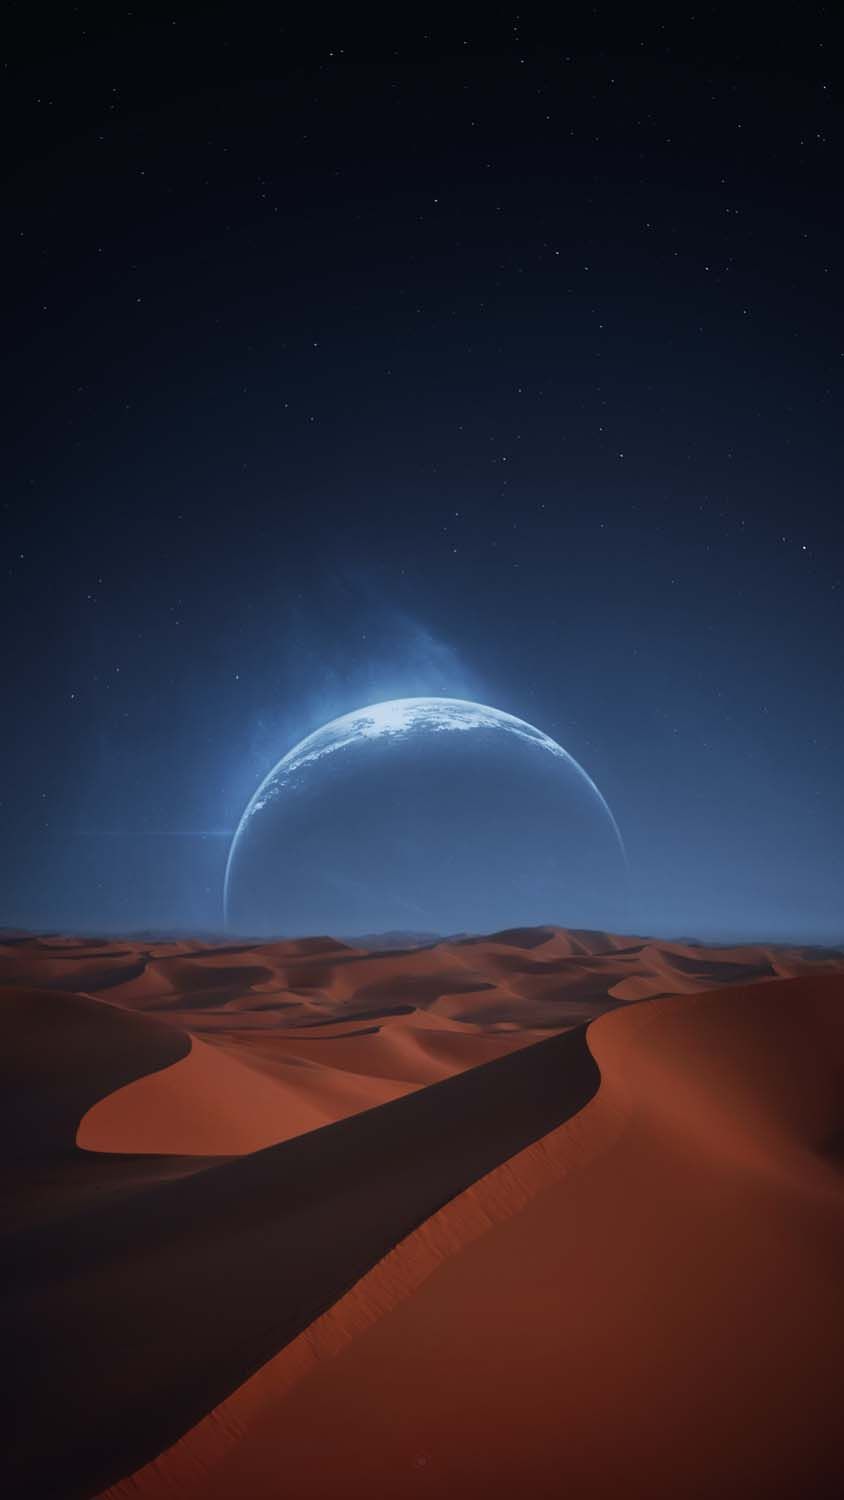 An alien planet in the distance, with a desert in the foreground - Desert